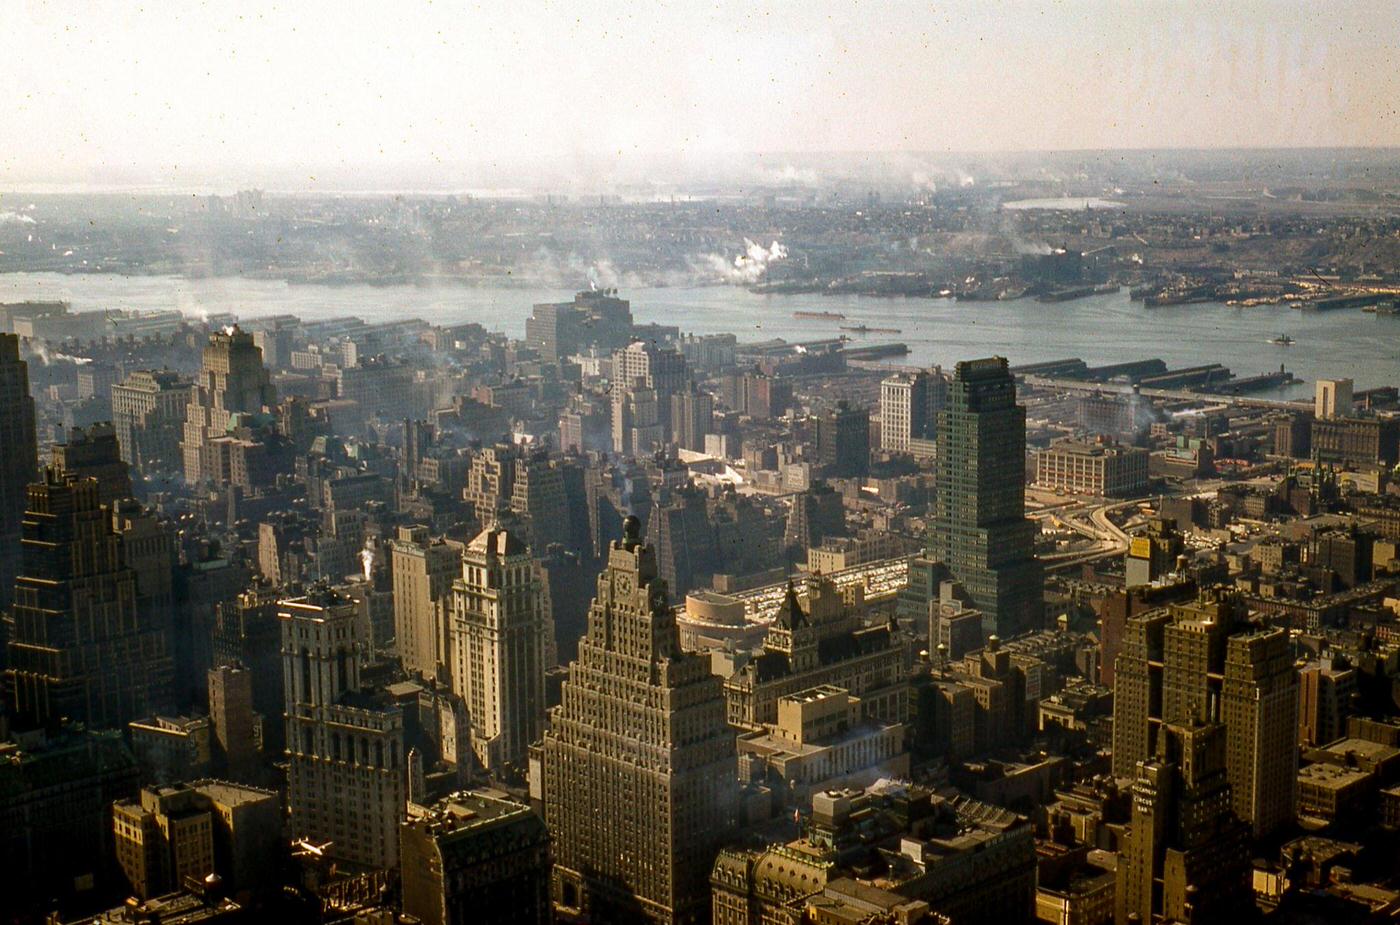 Panoramic View Of Times Square, Hell'S Kitchen, Chelsea, And West Side Of Manhattan, 1957